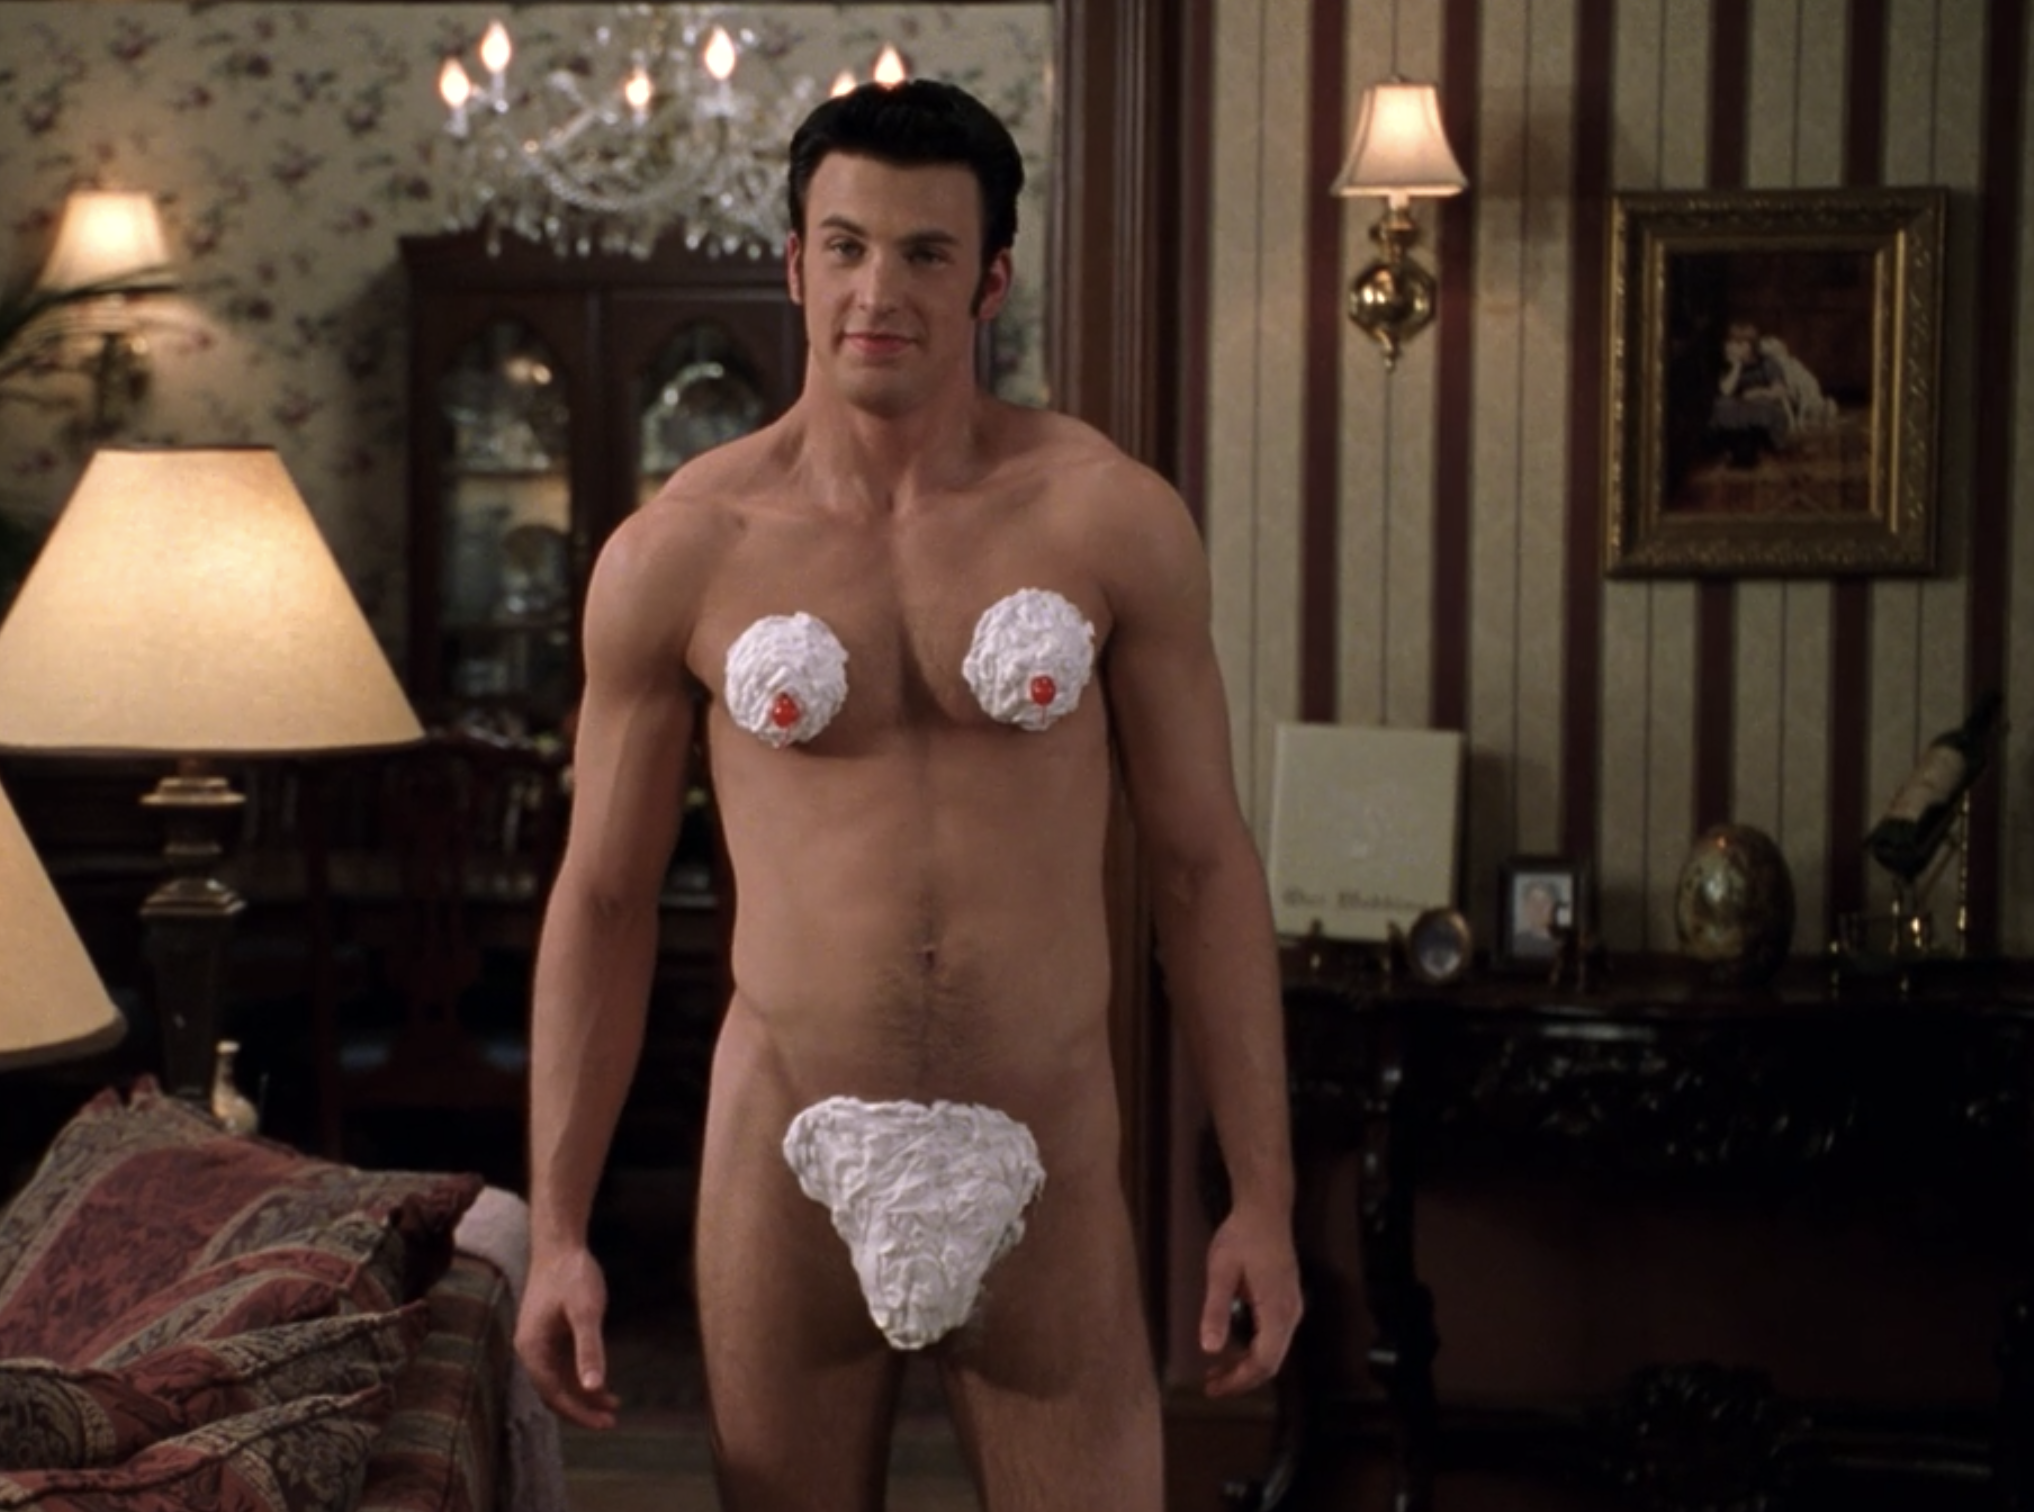 Chris Evans naked except for whipped cream covering his nipples and private parts